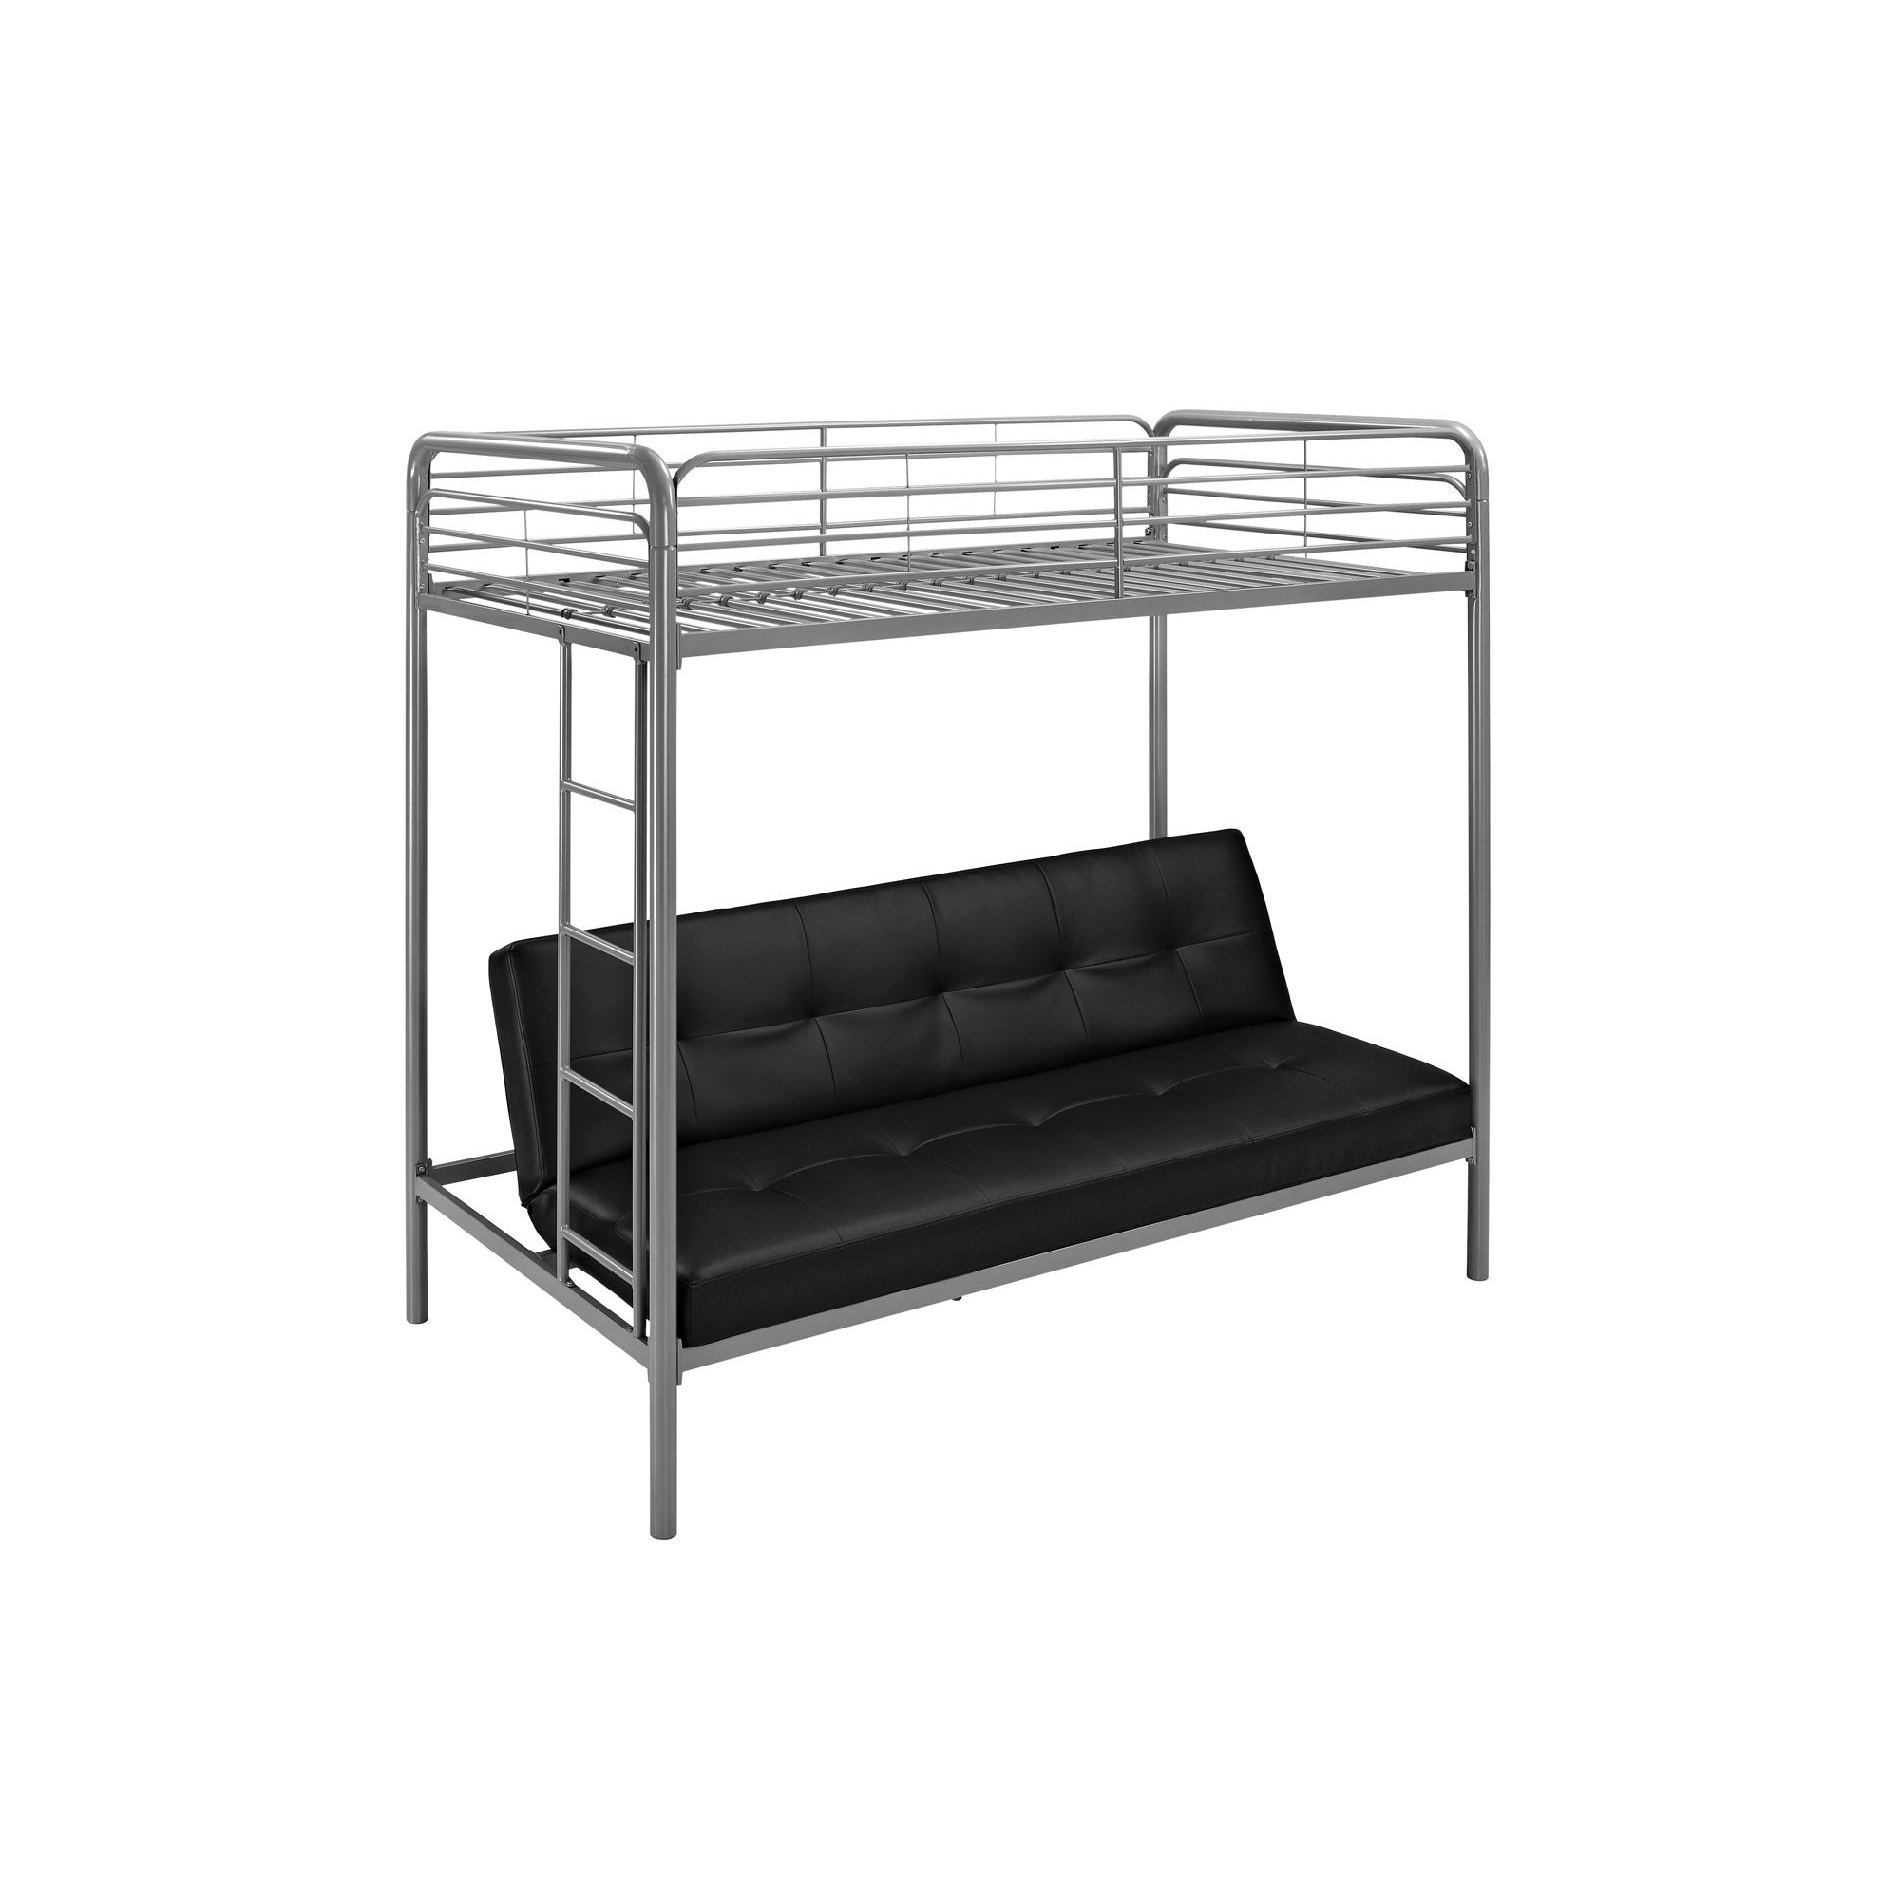 Payton Twin Over Futon Bunk Bed, Ameriwood Twin Over Full Bunk Bed In Black